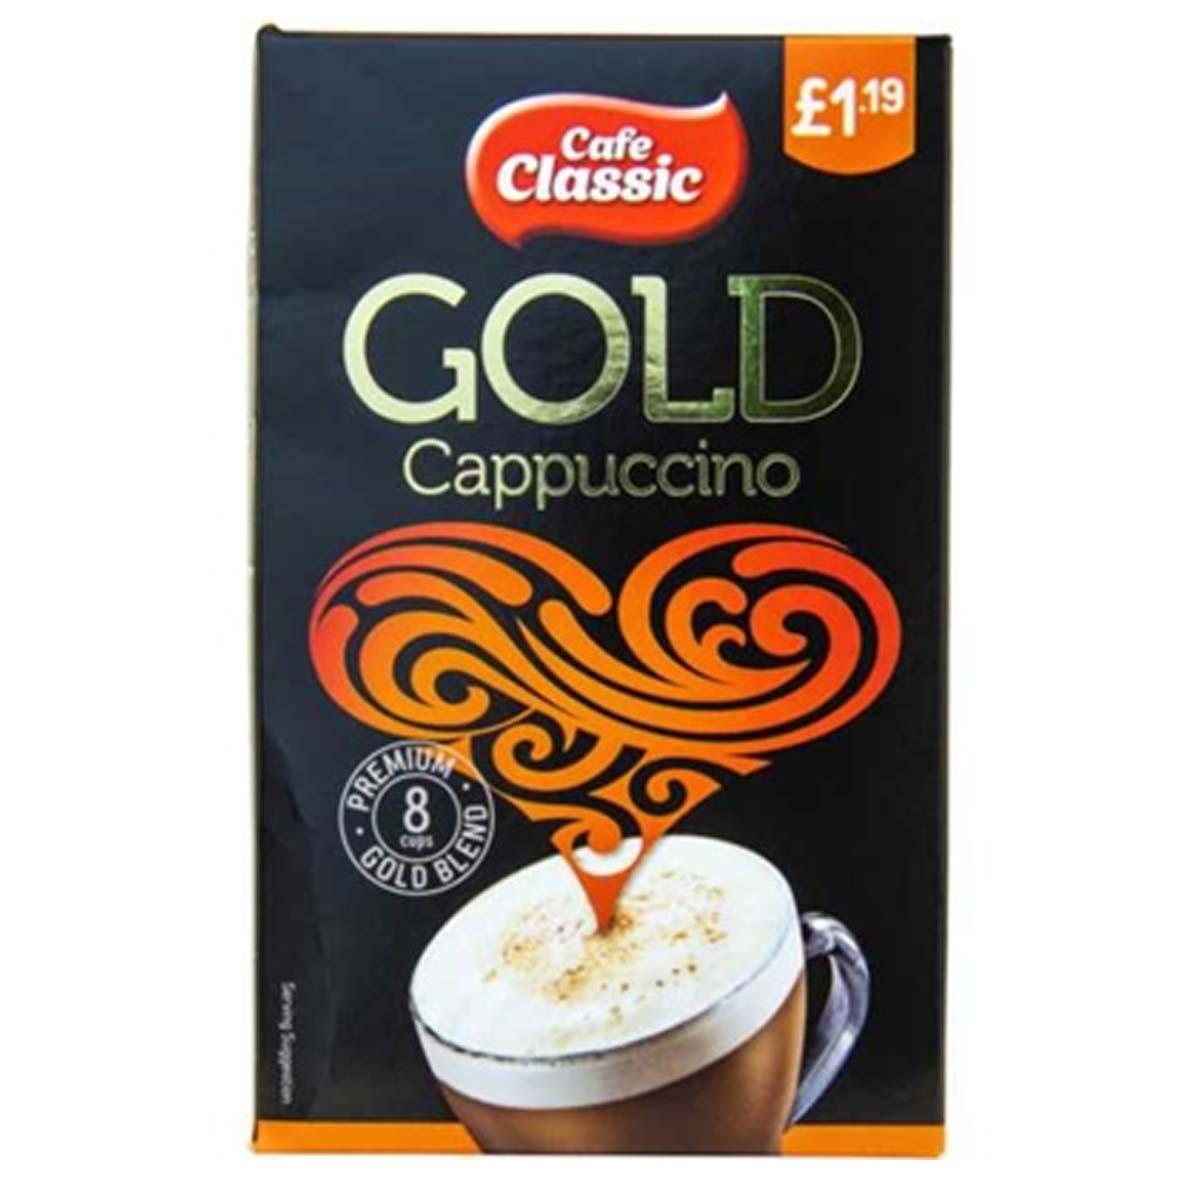 Cafe Classic - Cappuccino - 8 x 14g (112g) - Continental Food Store